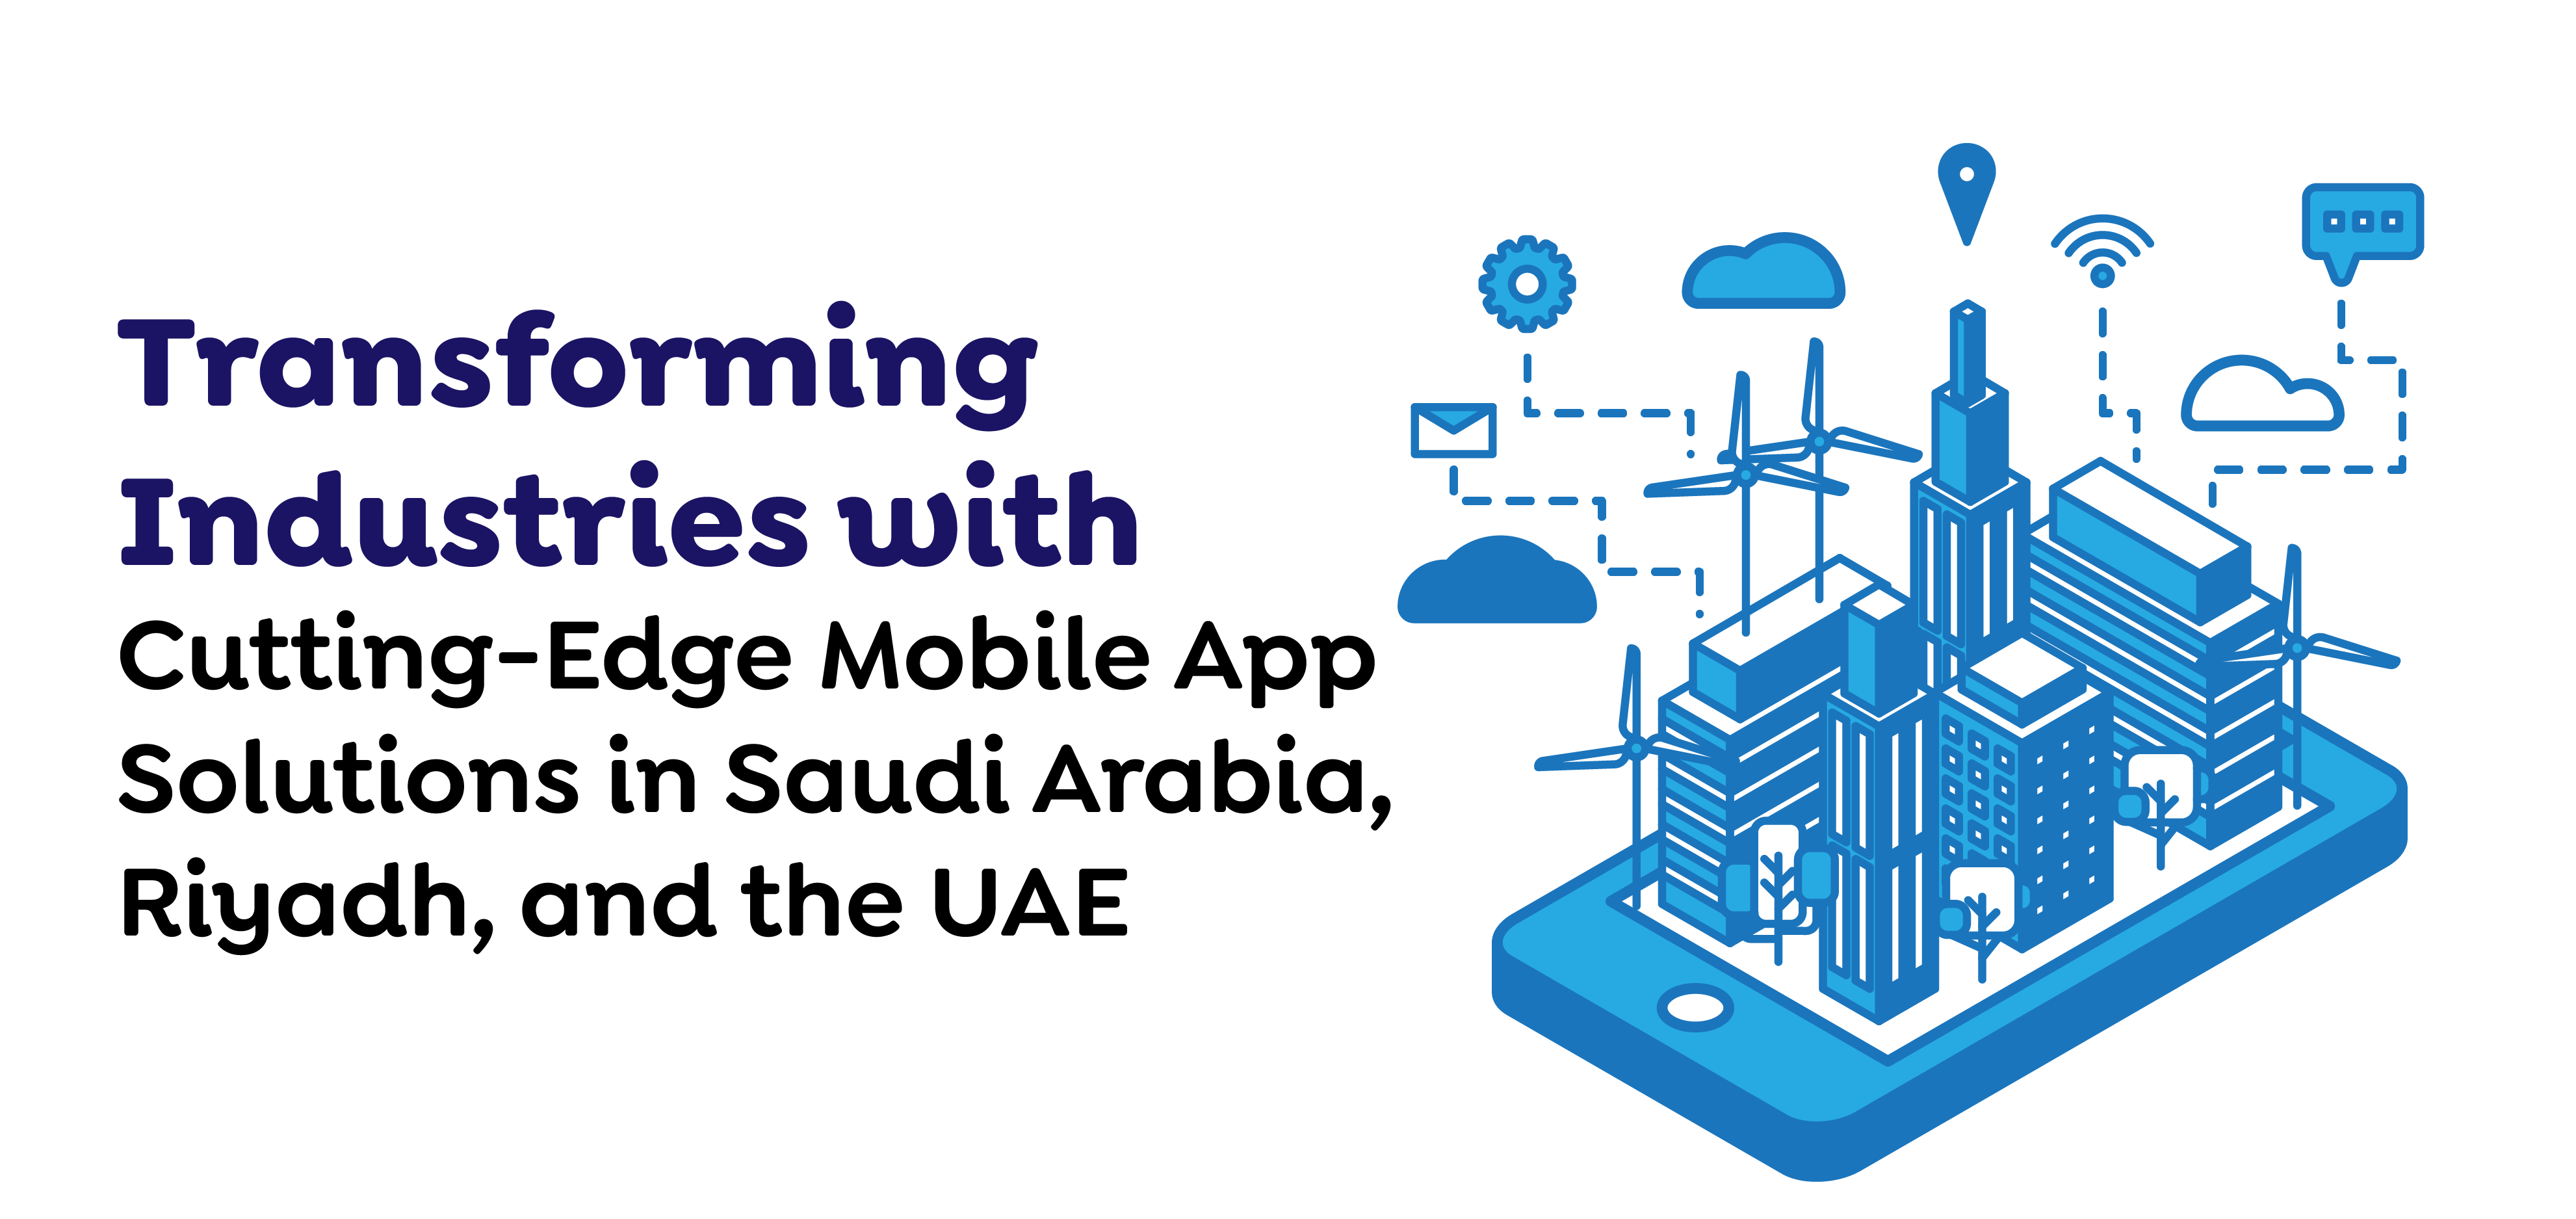 Transforming Industries with Cutting-Edge Mobile App Solutions in Saudi Arabia, Riyadh, and the UAE